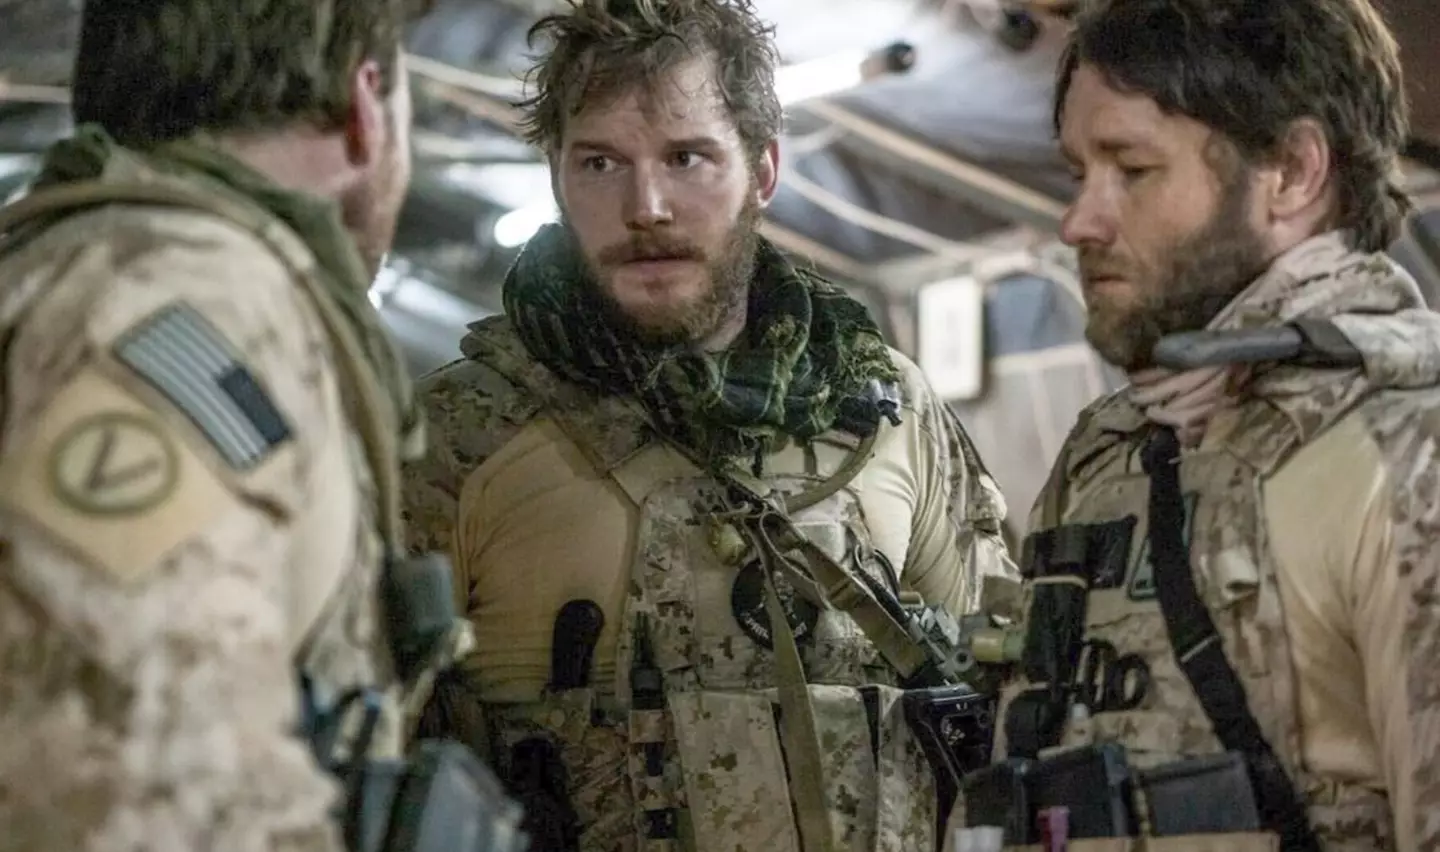 The actor stars as a Navy SEAL struggling to cope after his platoon is ambushed.